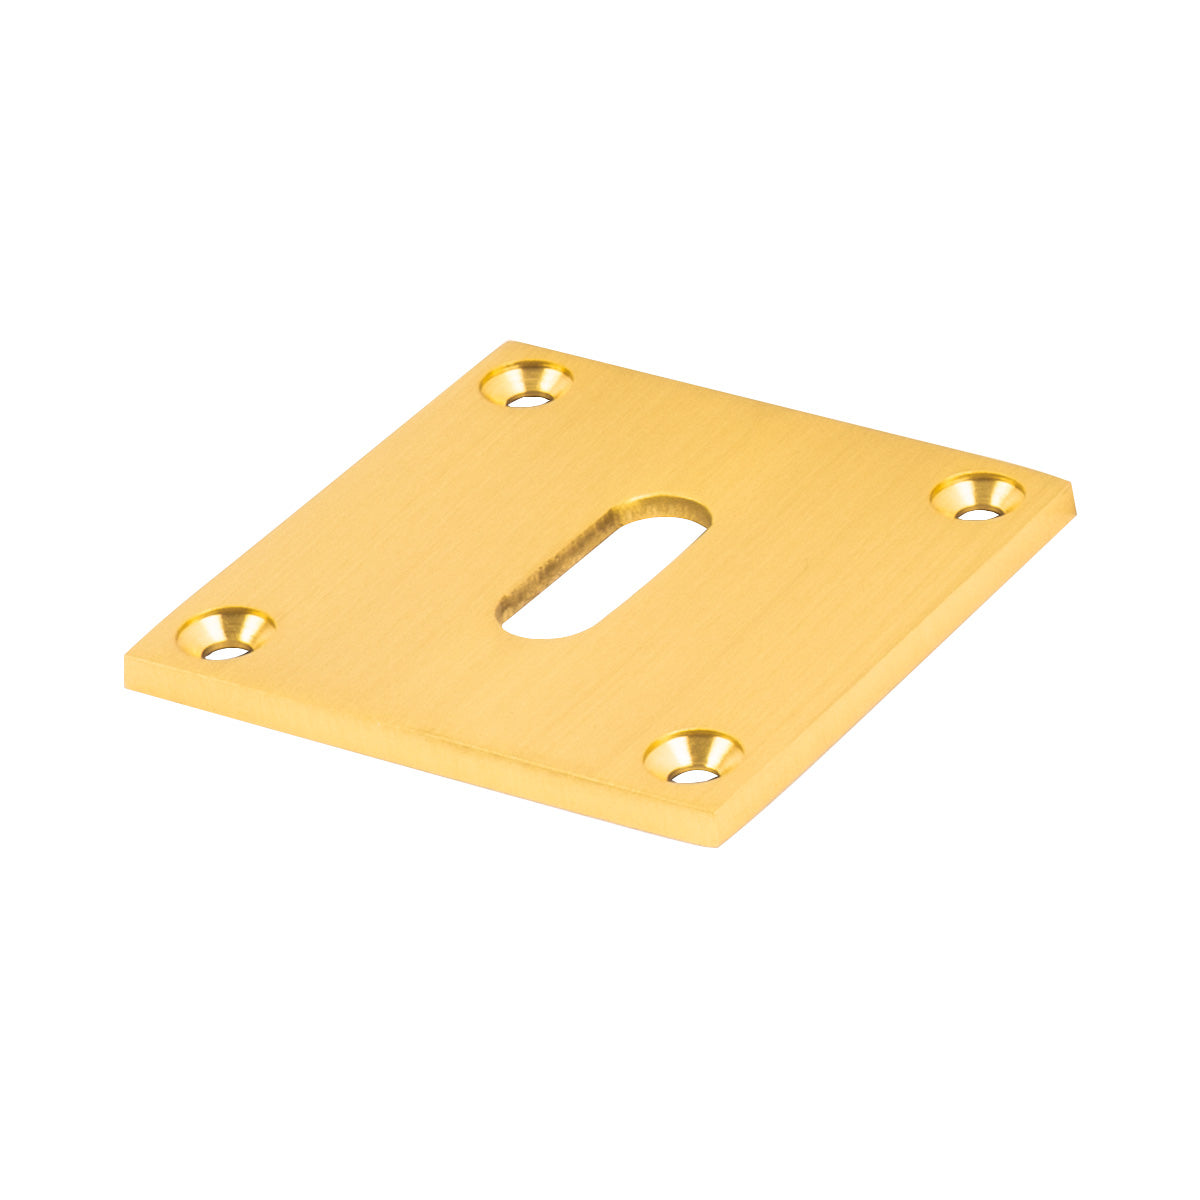 Classic Keyhole Plate, Finish Satin Bronze, Material Brass, Screw/Nail  135140-xxx (Not Included), Projection - Overall Dimensions 176 mm - HANDYCT